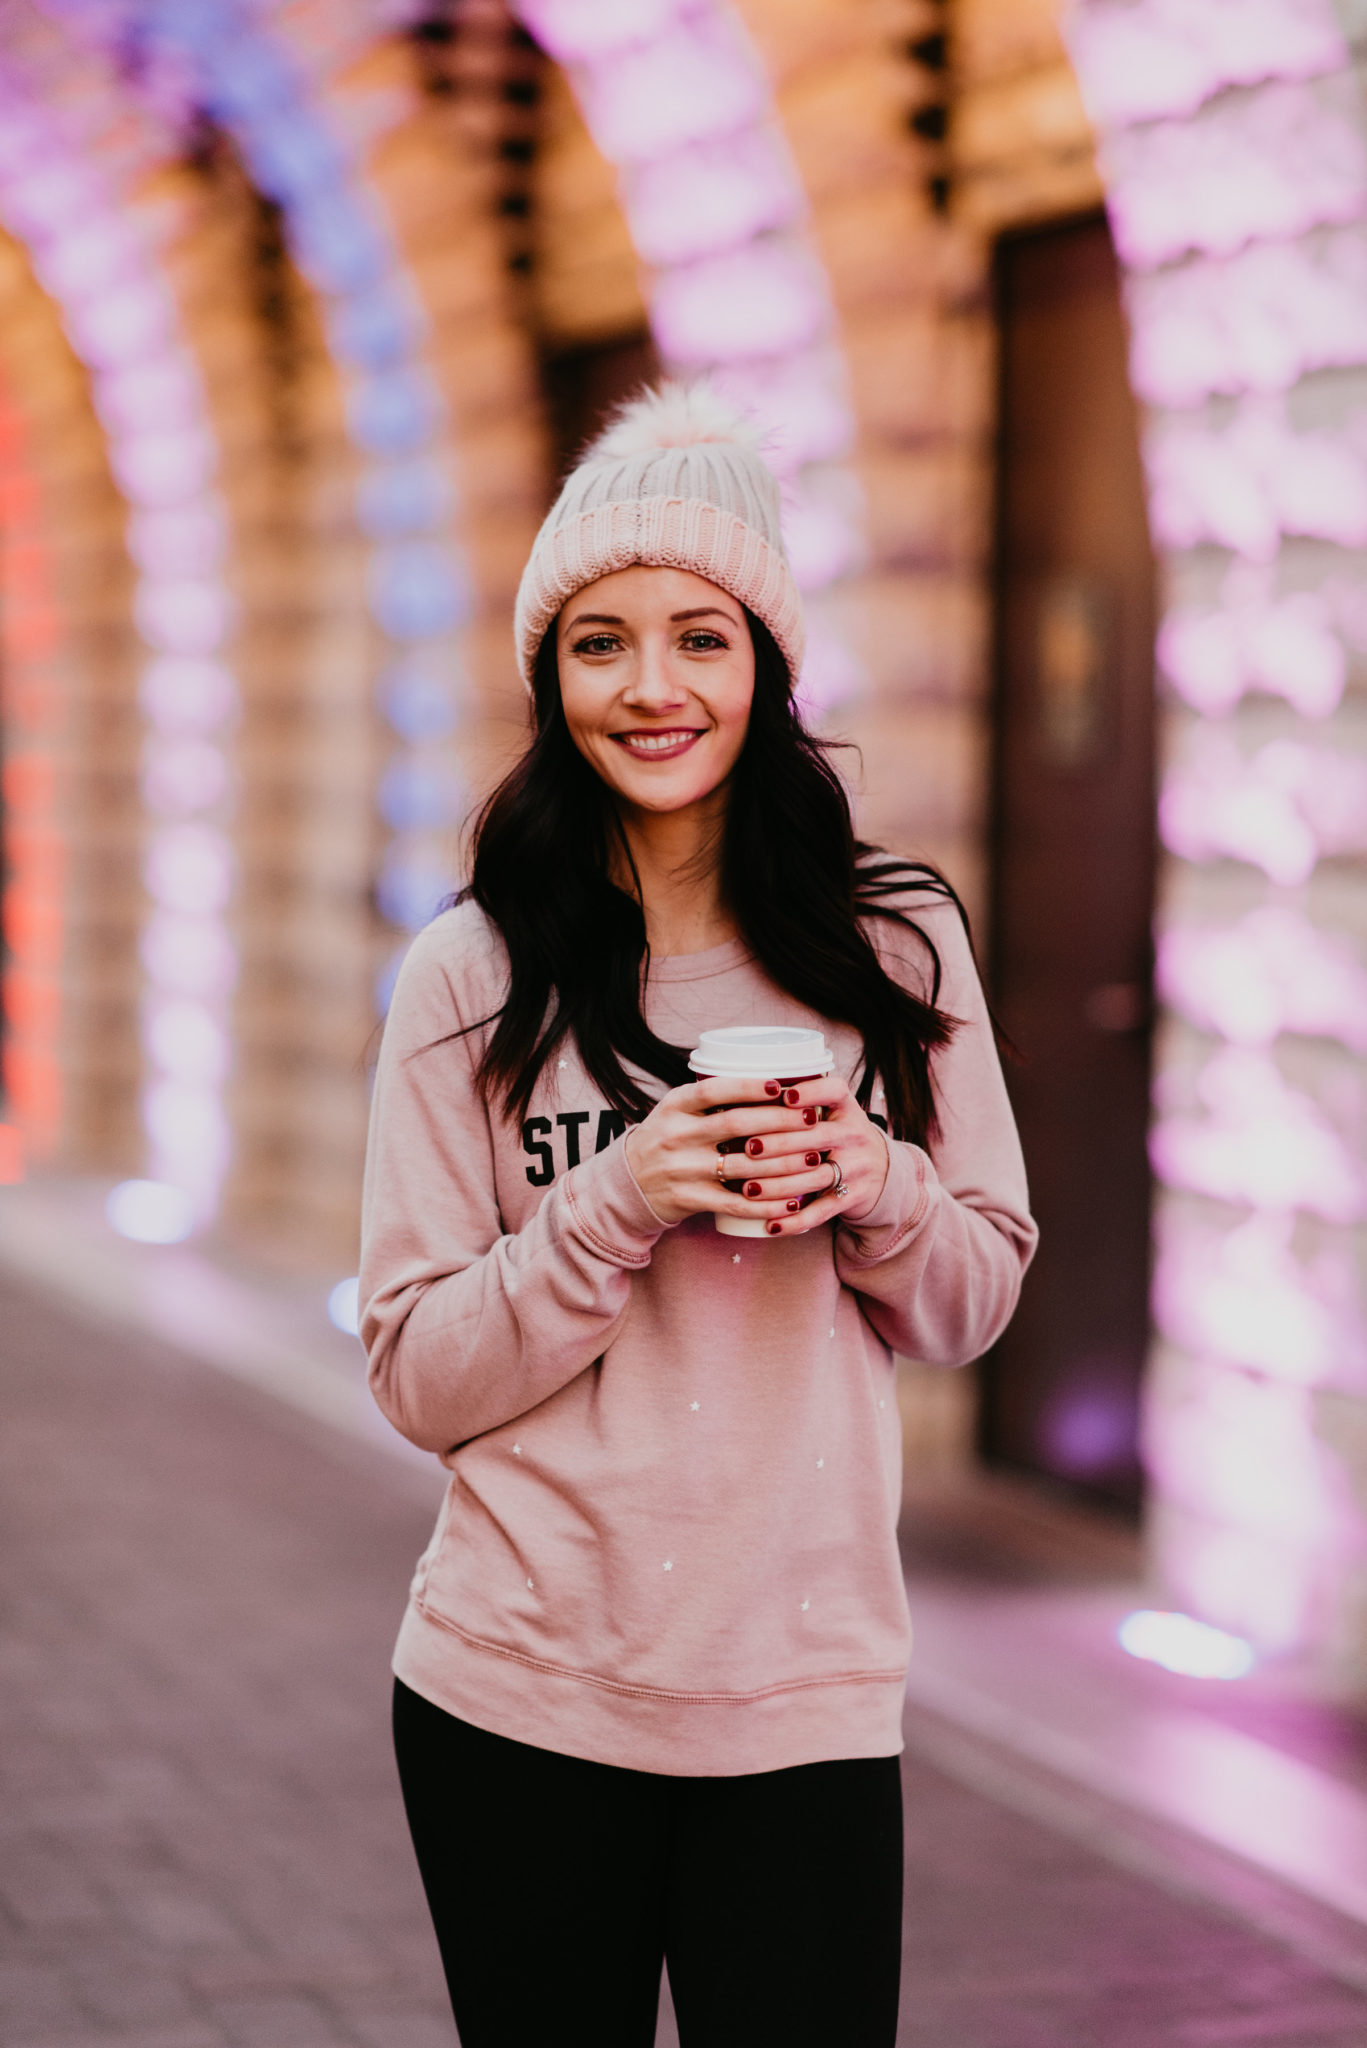 15 ways to treat yourself and a cozy winter outfit - 15 Ways to Treat Yourself by popular Las Vegas style blogger Outfits & Outings